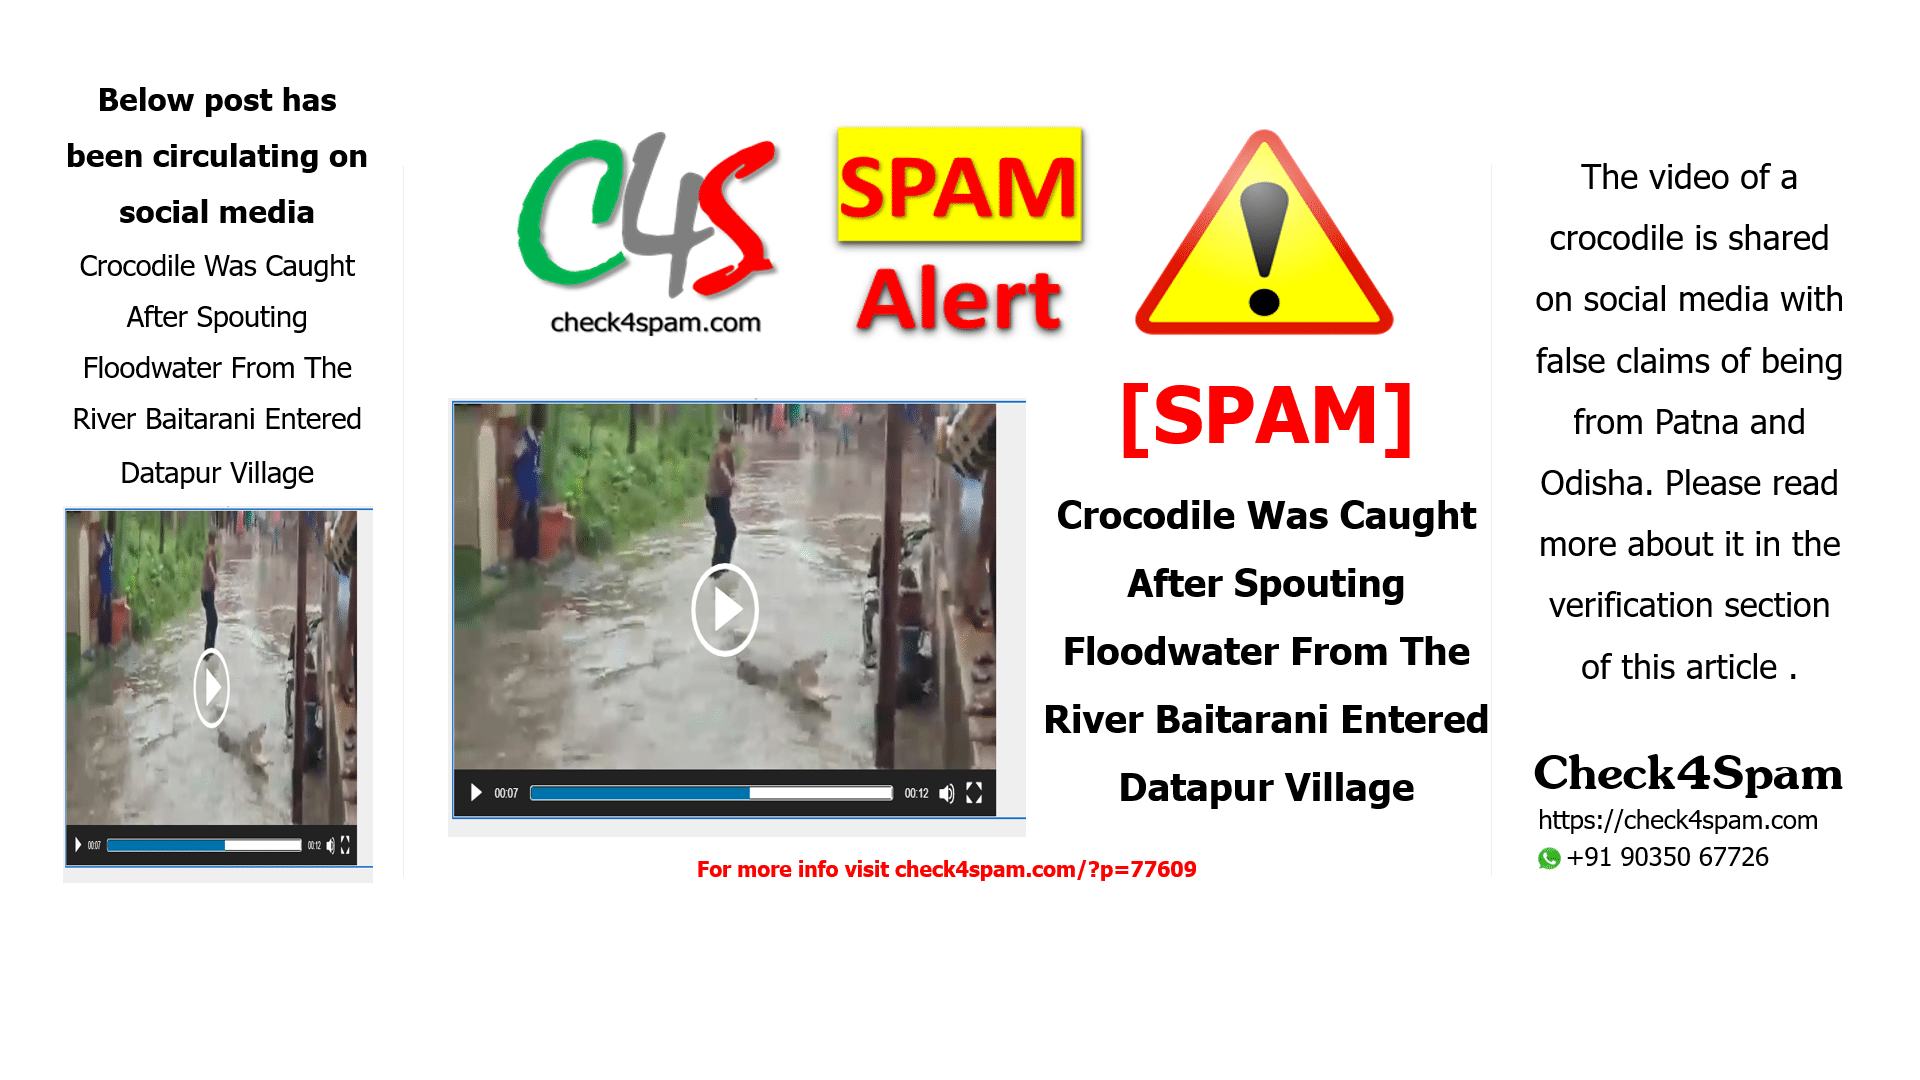 Crocodile Was Caught After Spouting Floodwater From The River Baitarani Entered Datapur Village